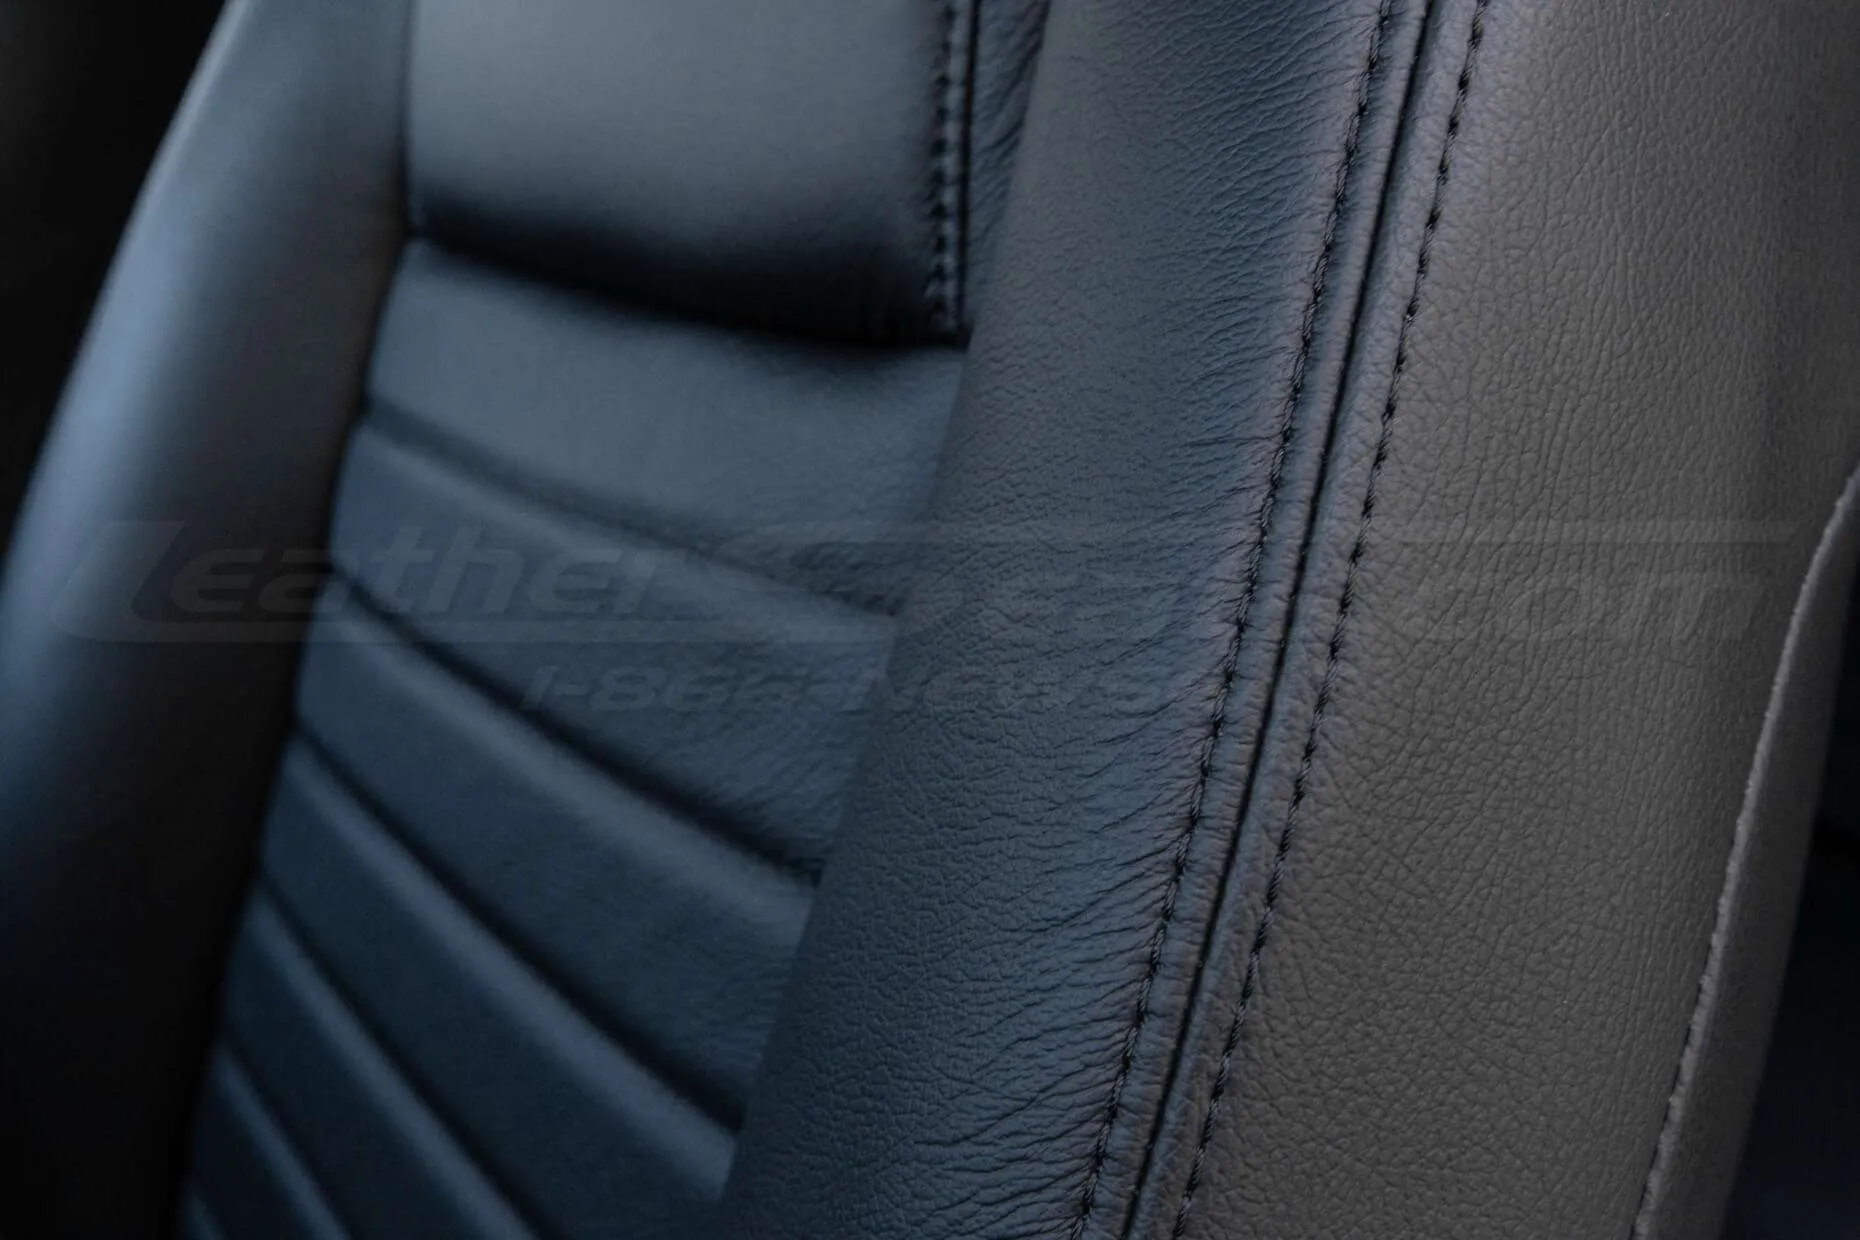 2005-2009 Ford Mustang Leather Seats - Black - Matching black double-stitching